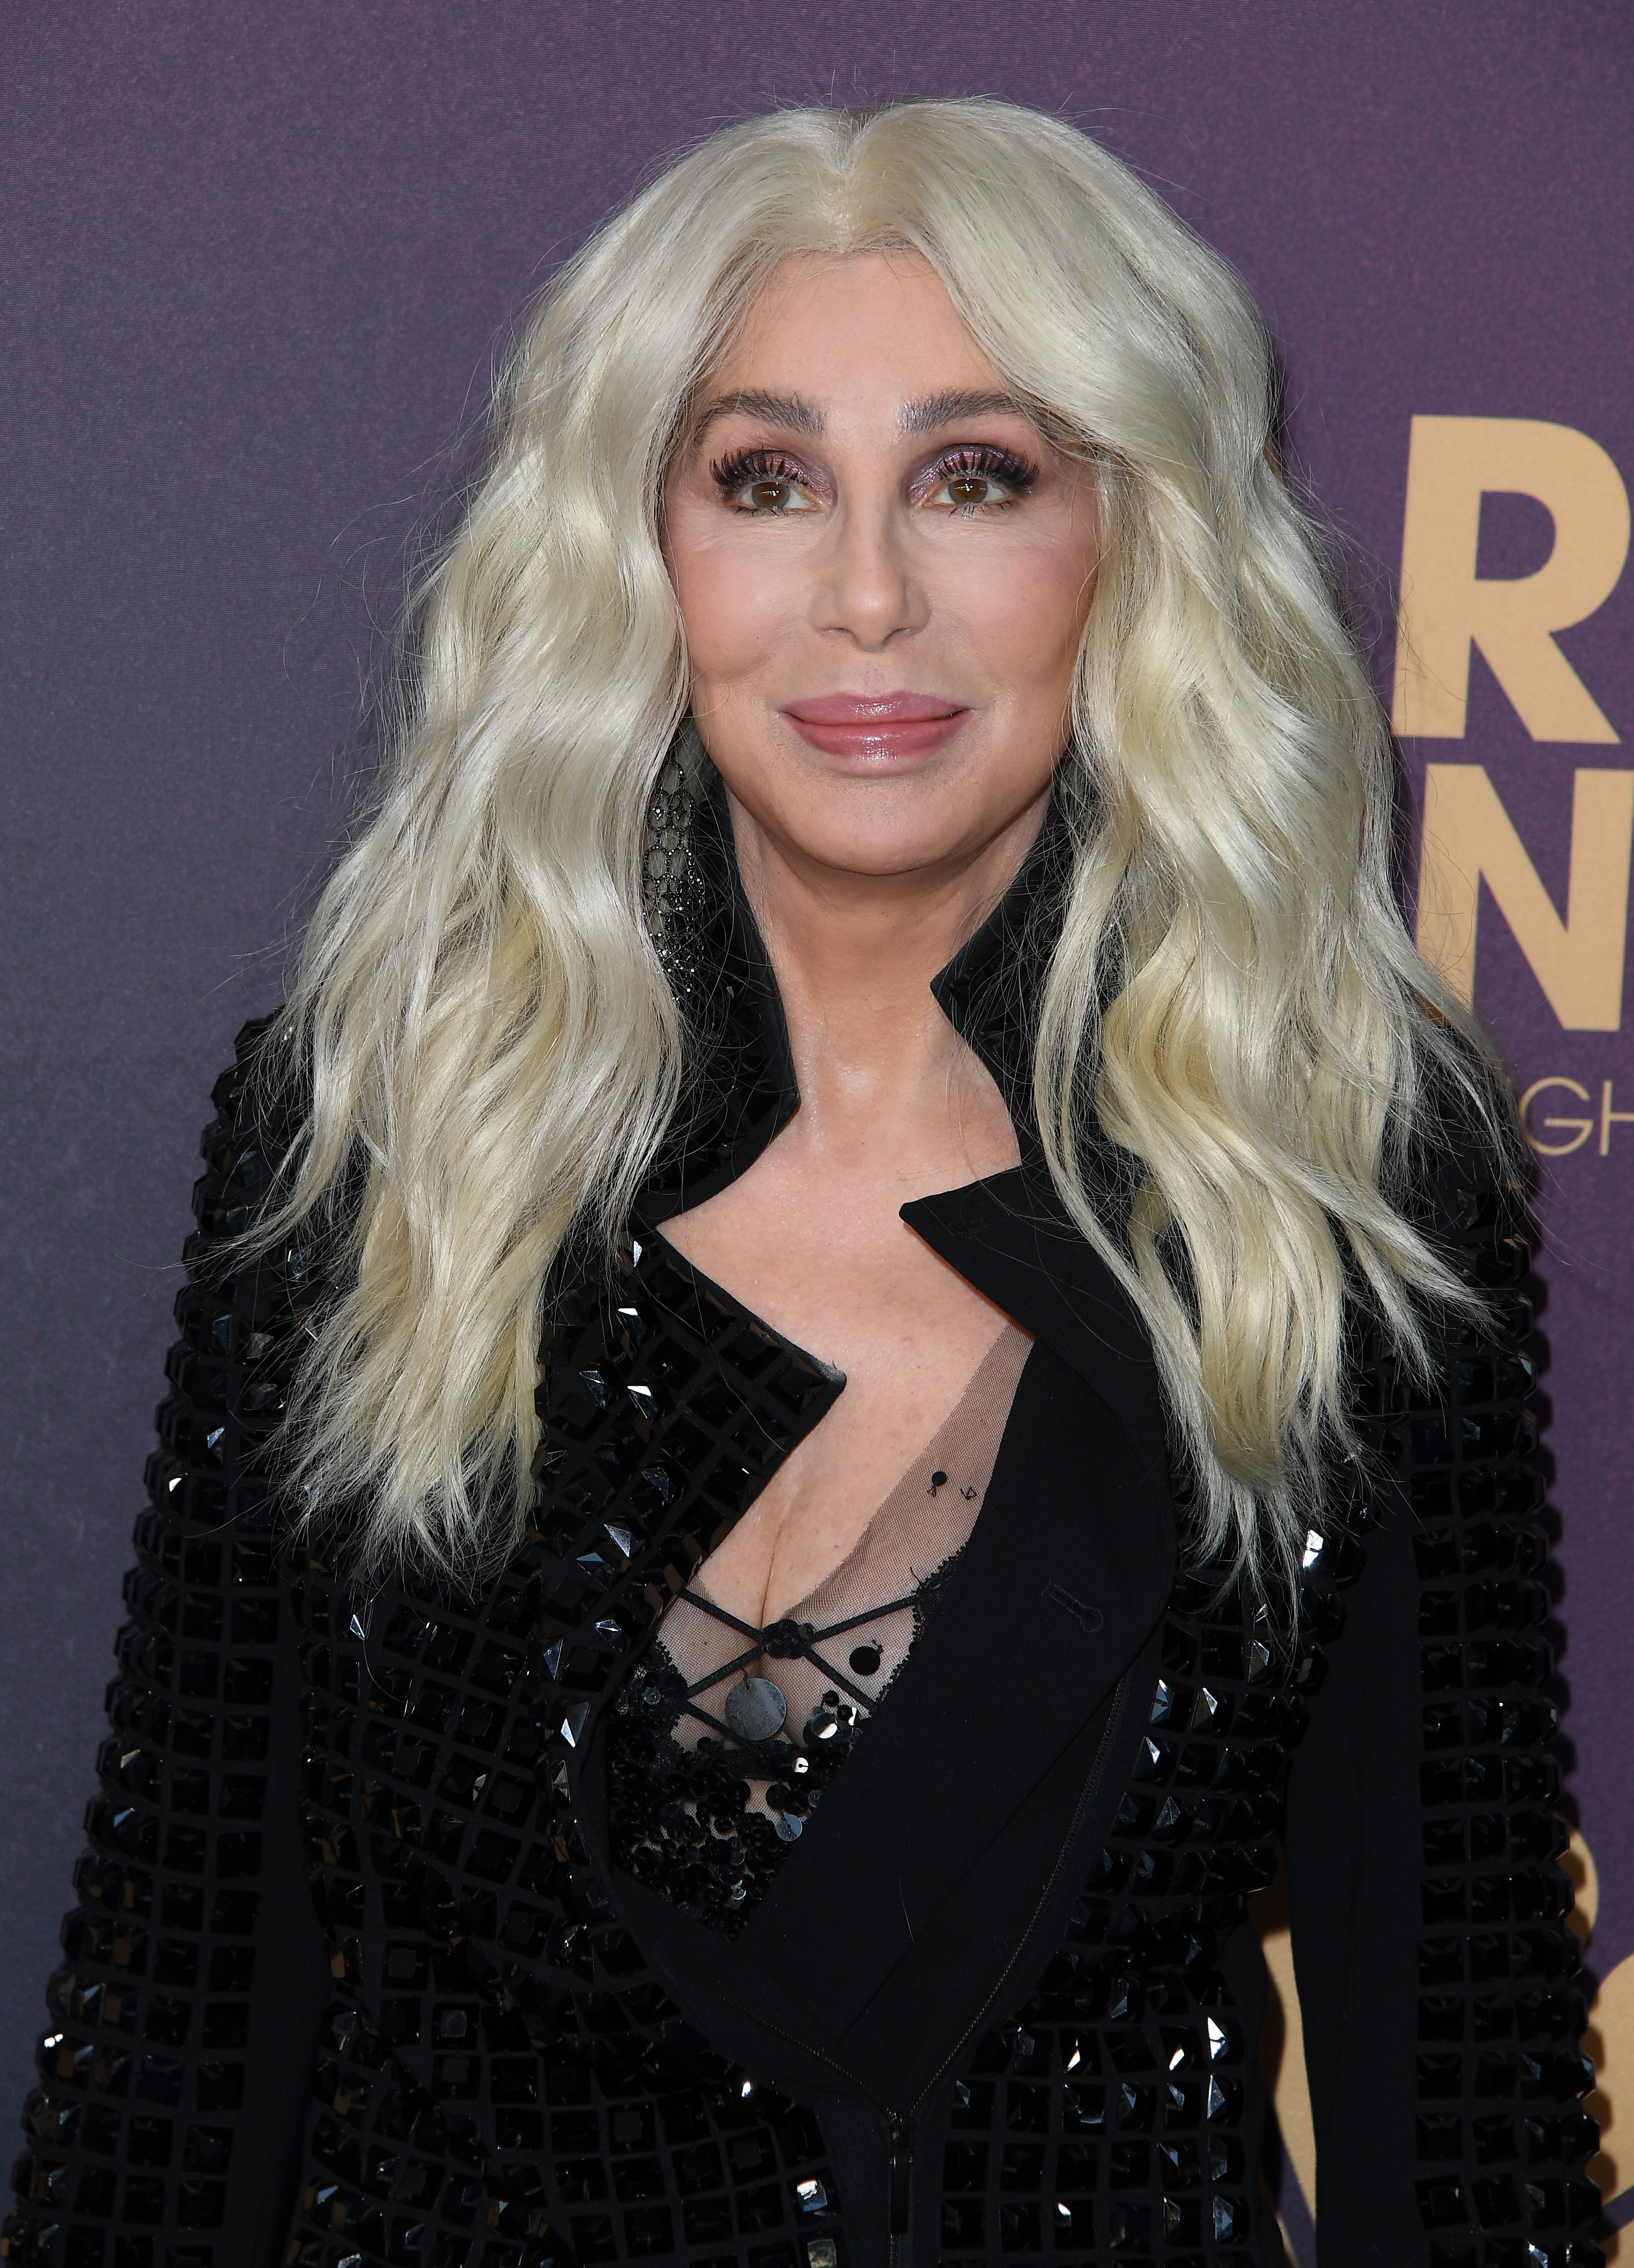 Cher arrives at the NBC's "Carol Burnett: 90 Years Of Laughter + Love" Birthday Special at Avalon Hollywood & Bardot in Los Angeles, California, on March 2, 2023. | Source: Getty Images